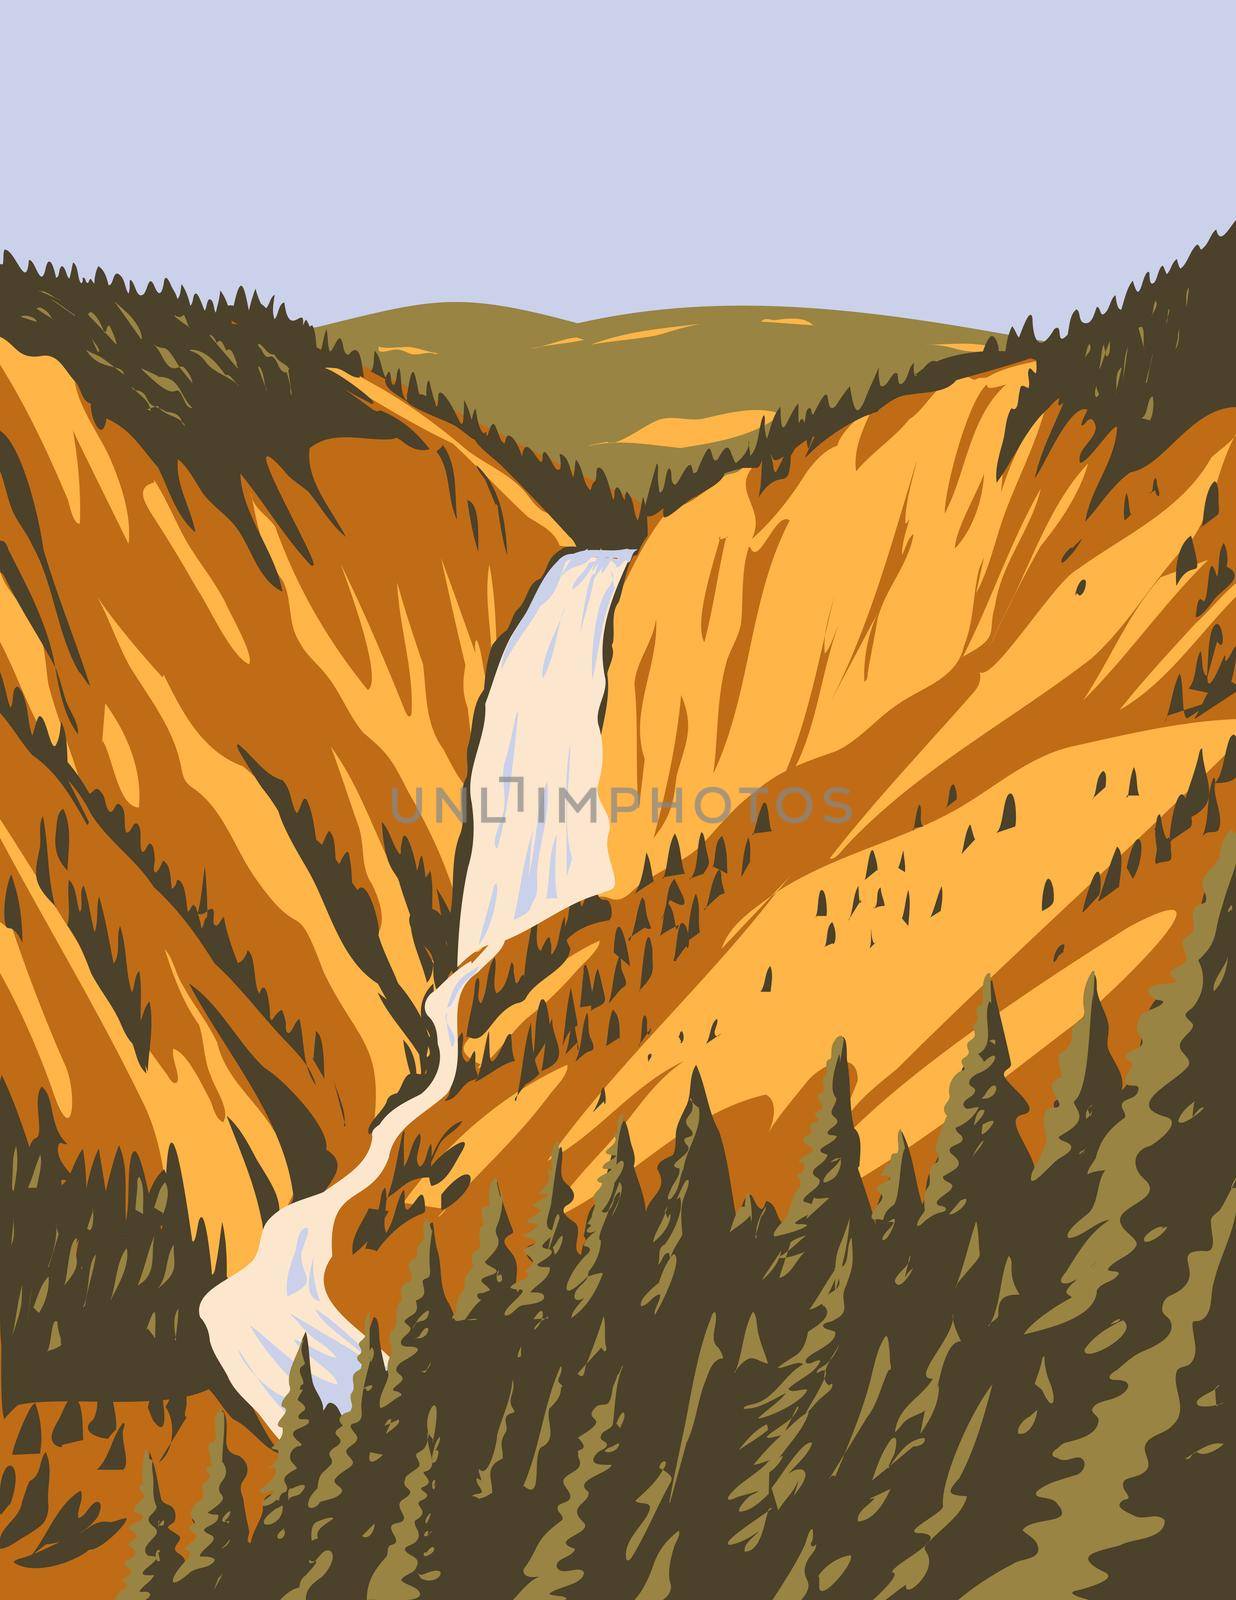 WPA poster art of Lower Yellowstone Falls, the largest volume waterfall in the Rocky Mountains within Yellowstone National Park, Wyoming USA done in works project administration style.